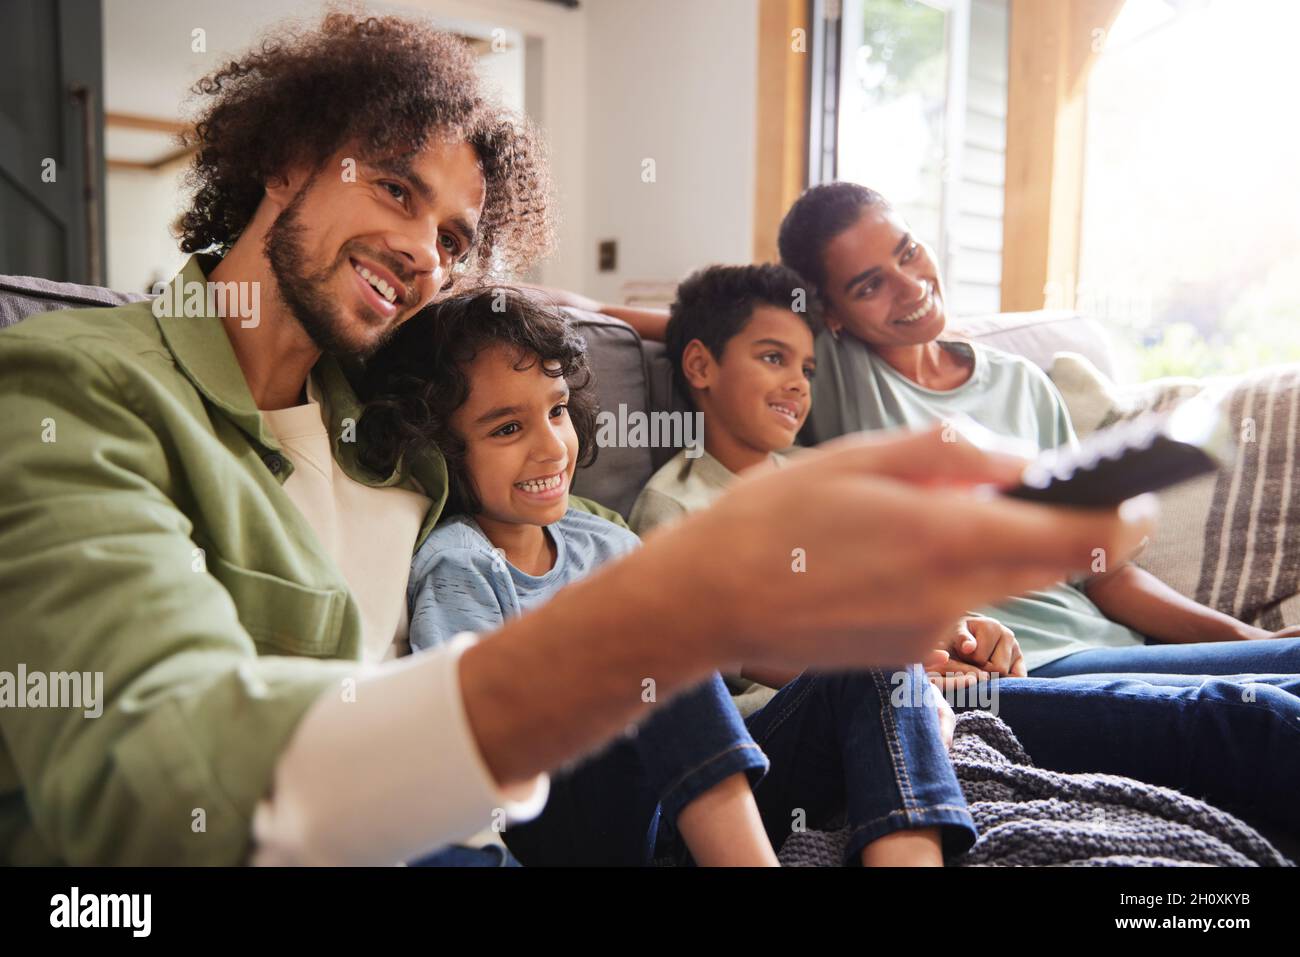 Family watching TV with father using remote Stock Photo